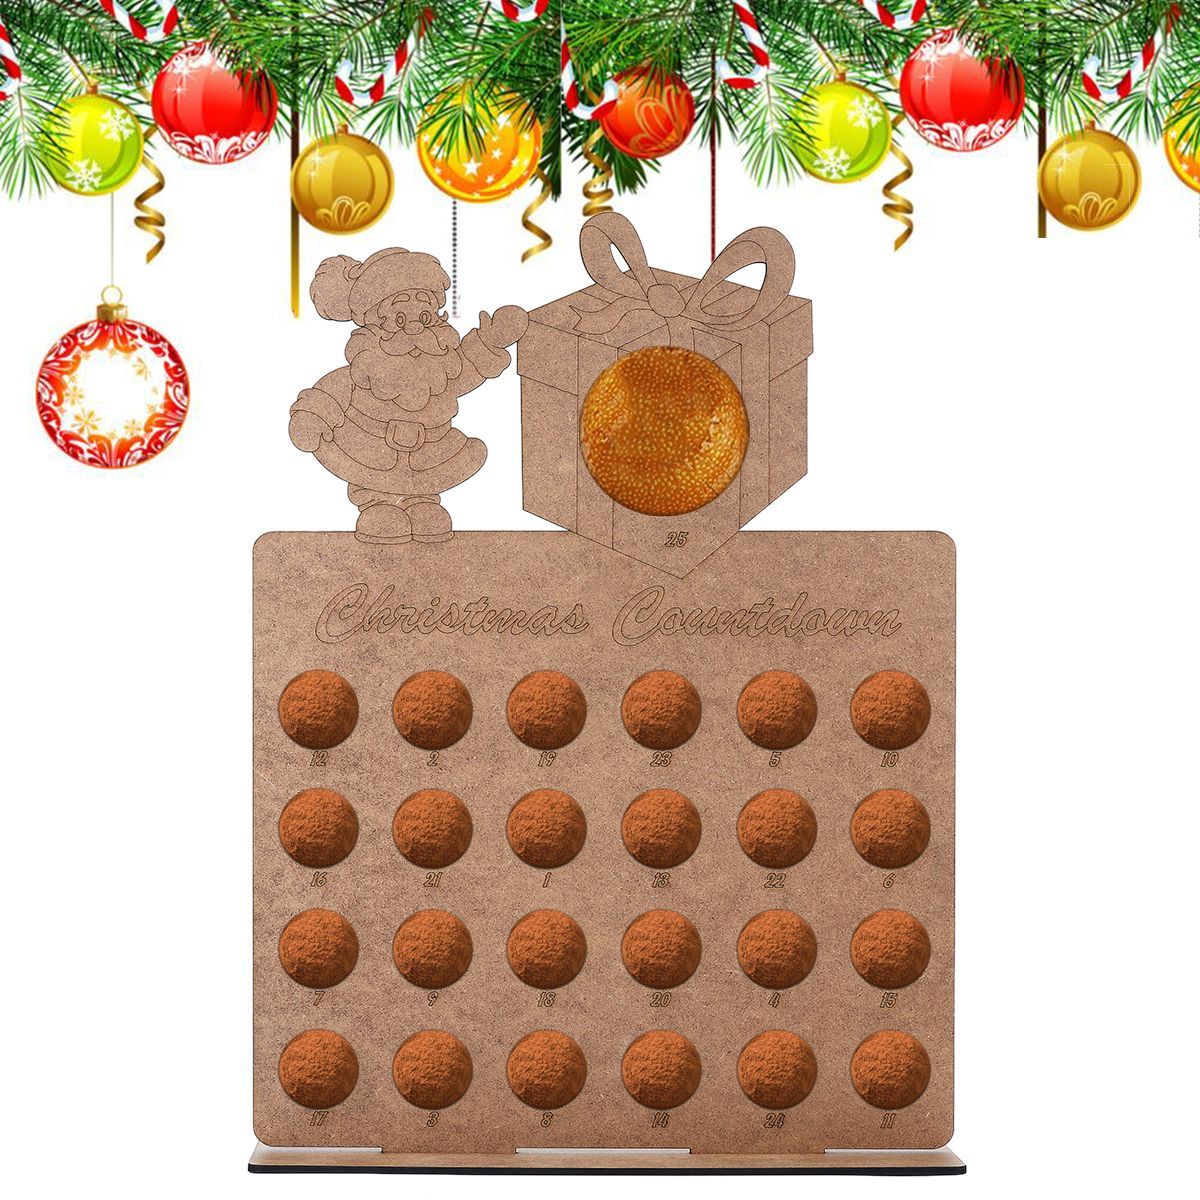 Wooden-Advent-Calendar-Christmas-Tree-24-Chocolates-Stand-Rack-Home-Decorations-1458956